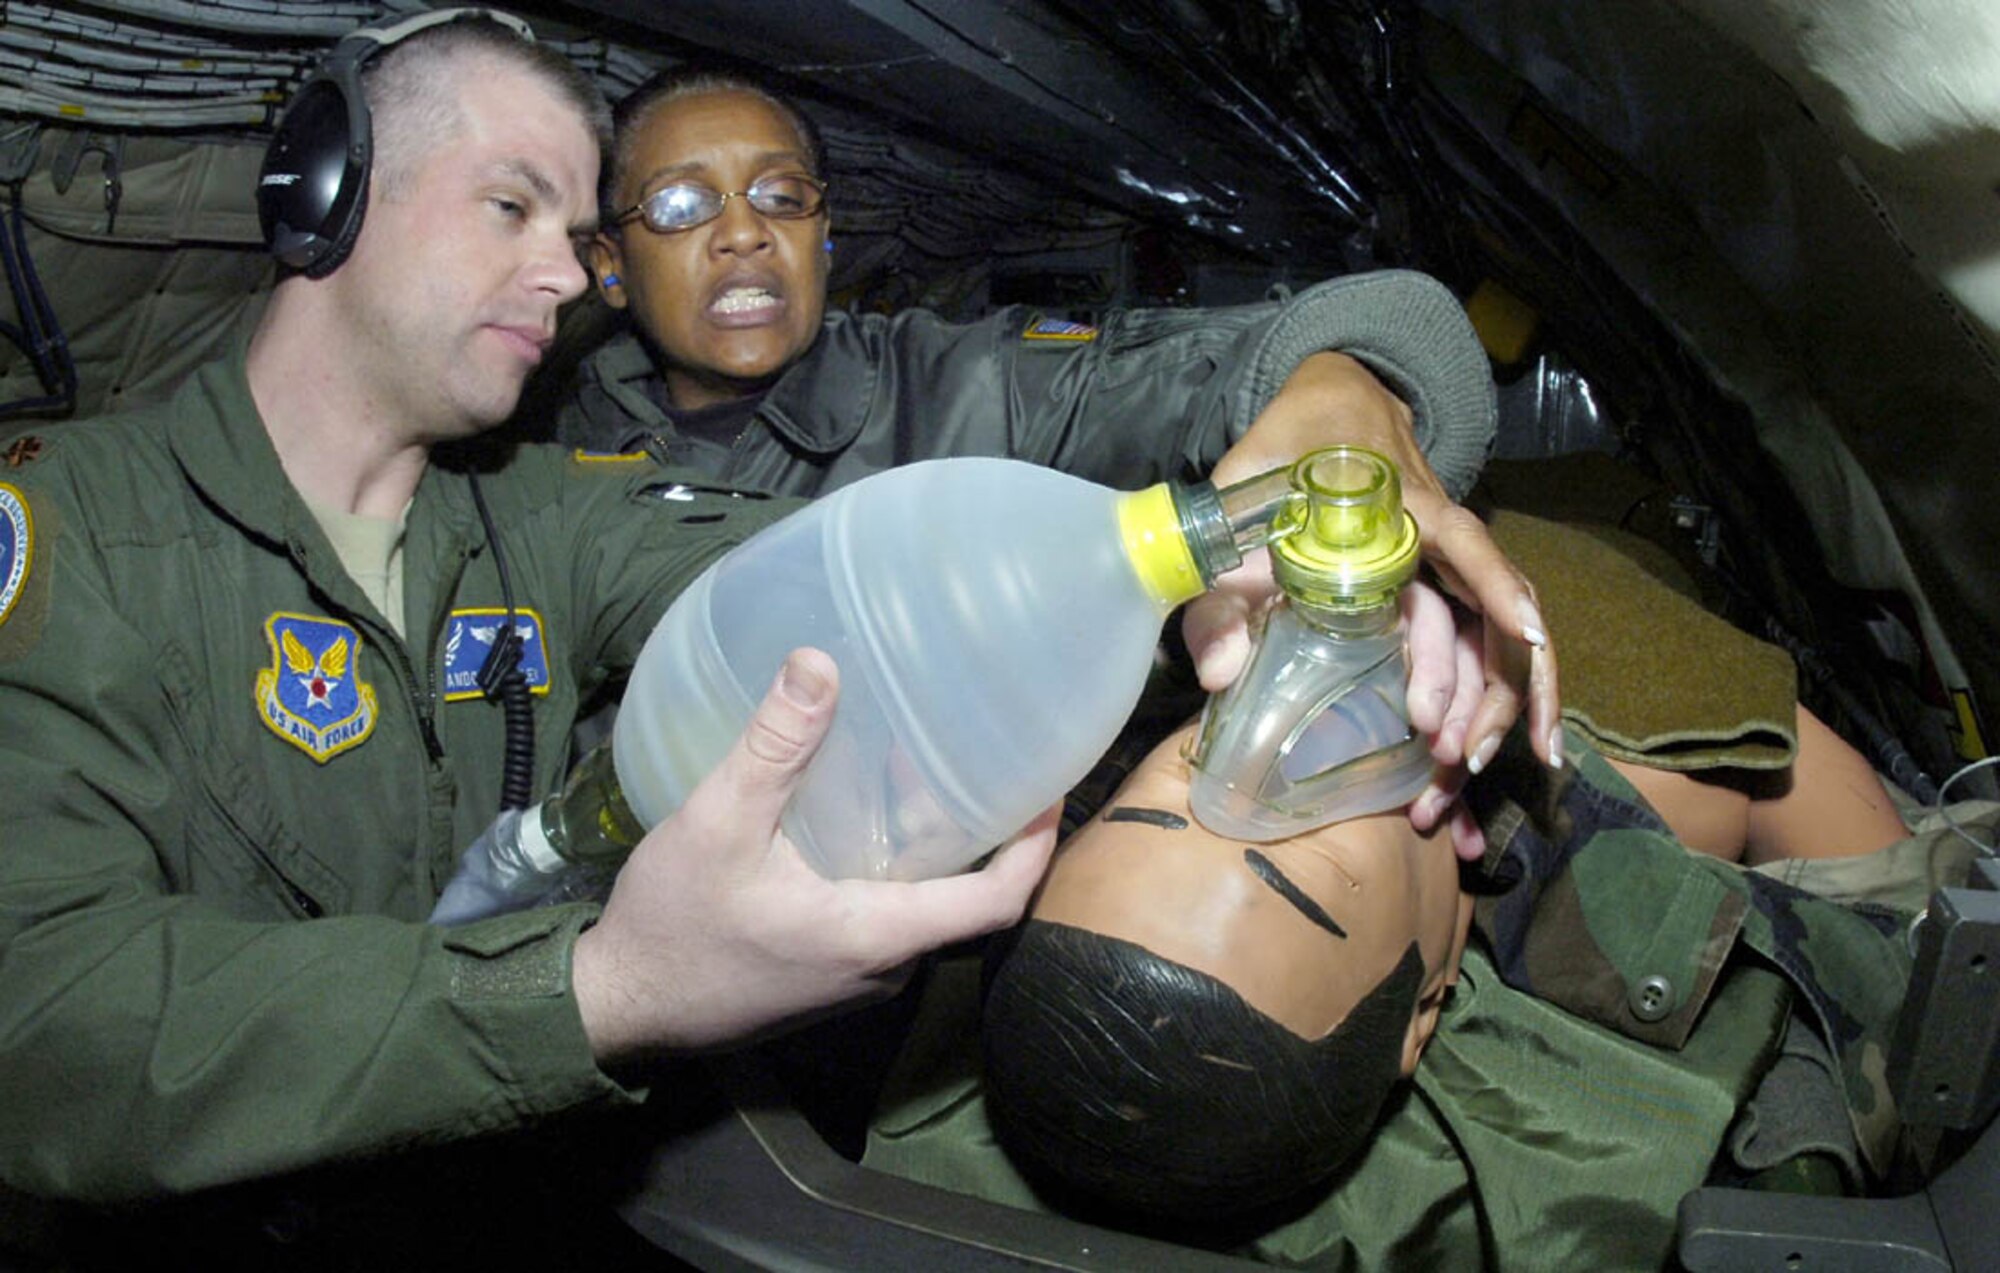 ANDREWS AIR FORCE BASE, Md. -- Lt. Col. Vanessa Mattox, 459th Aeromedical Evacuation Squadron commander, trains Maj. Brandon L. Bailey, 459th AES flight nurse, on how to ensure a bag valve mask is sealed at the mouth of "Trauma Tom," a 195-pound dummy, during a simulated medical in-flight emergency training exercise. (U.S. Air Force photo/Bobby Jones)